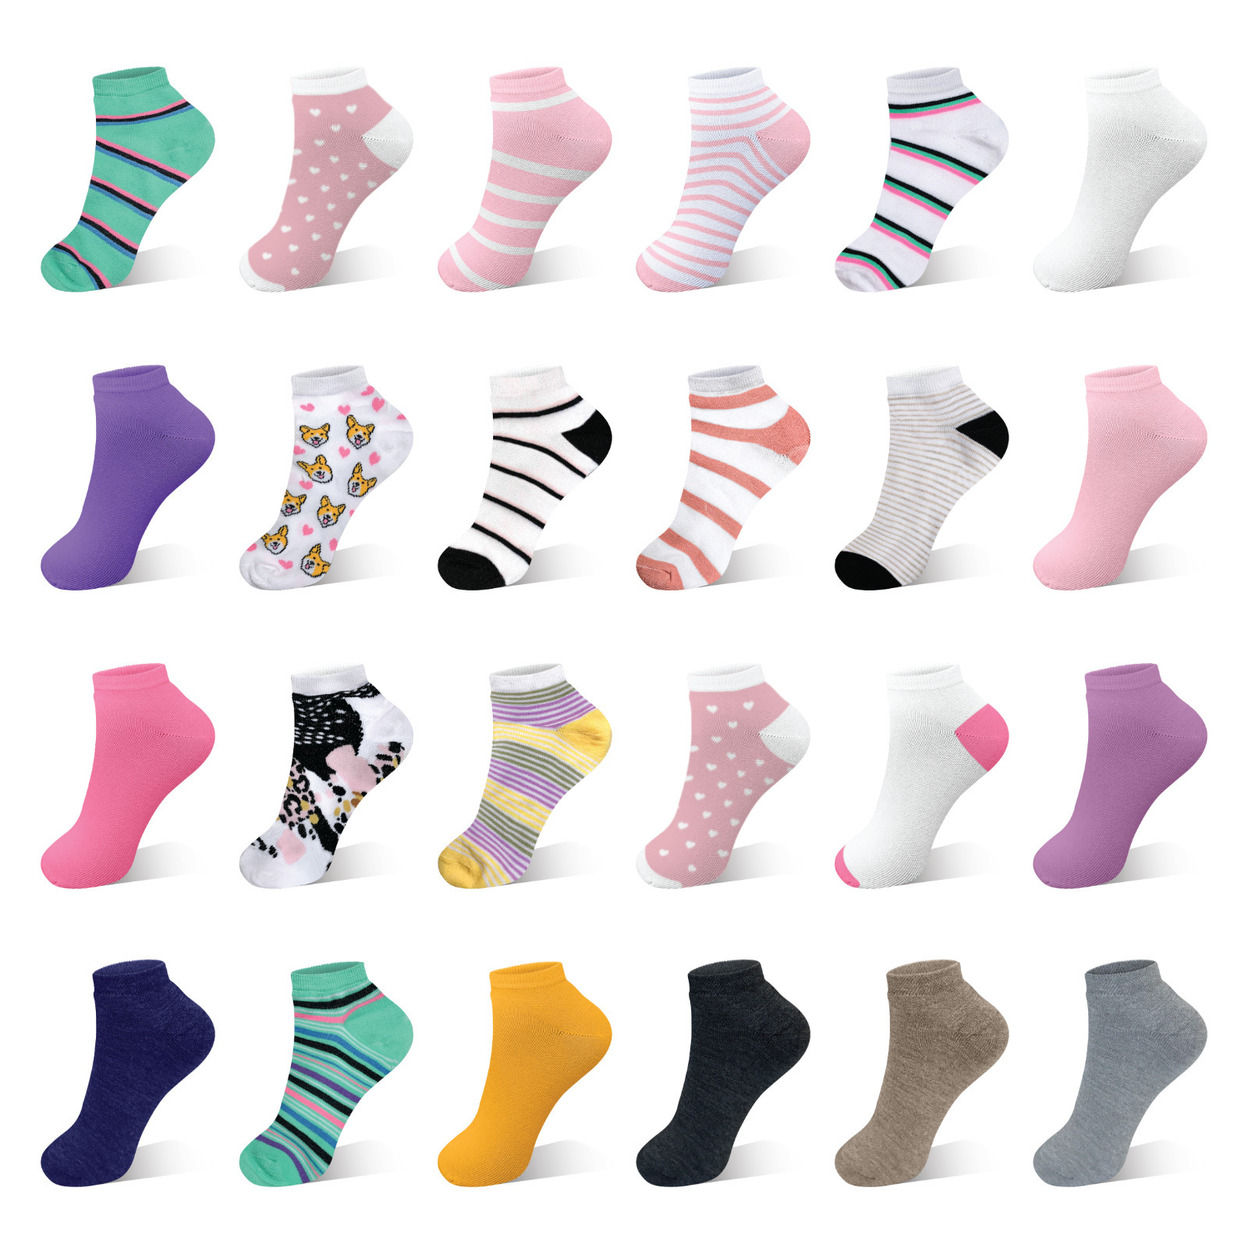 Multi-Pairs: Women’s Breathable Fun-Funky Colorful No Show Low Cut Ankle Socks - 20-pairs